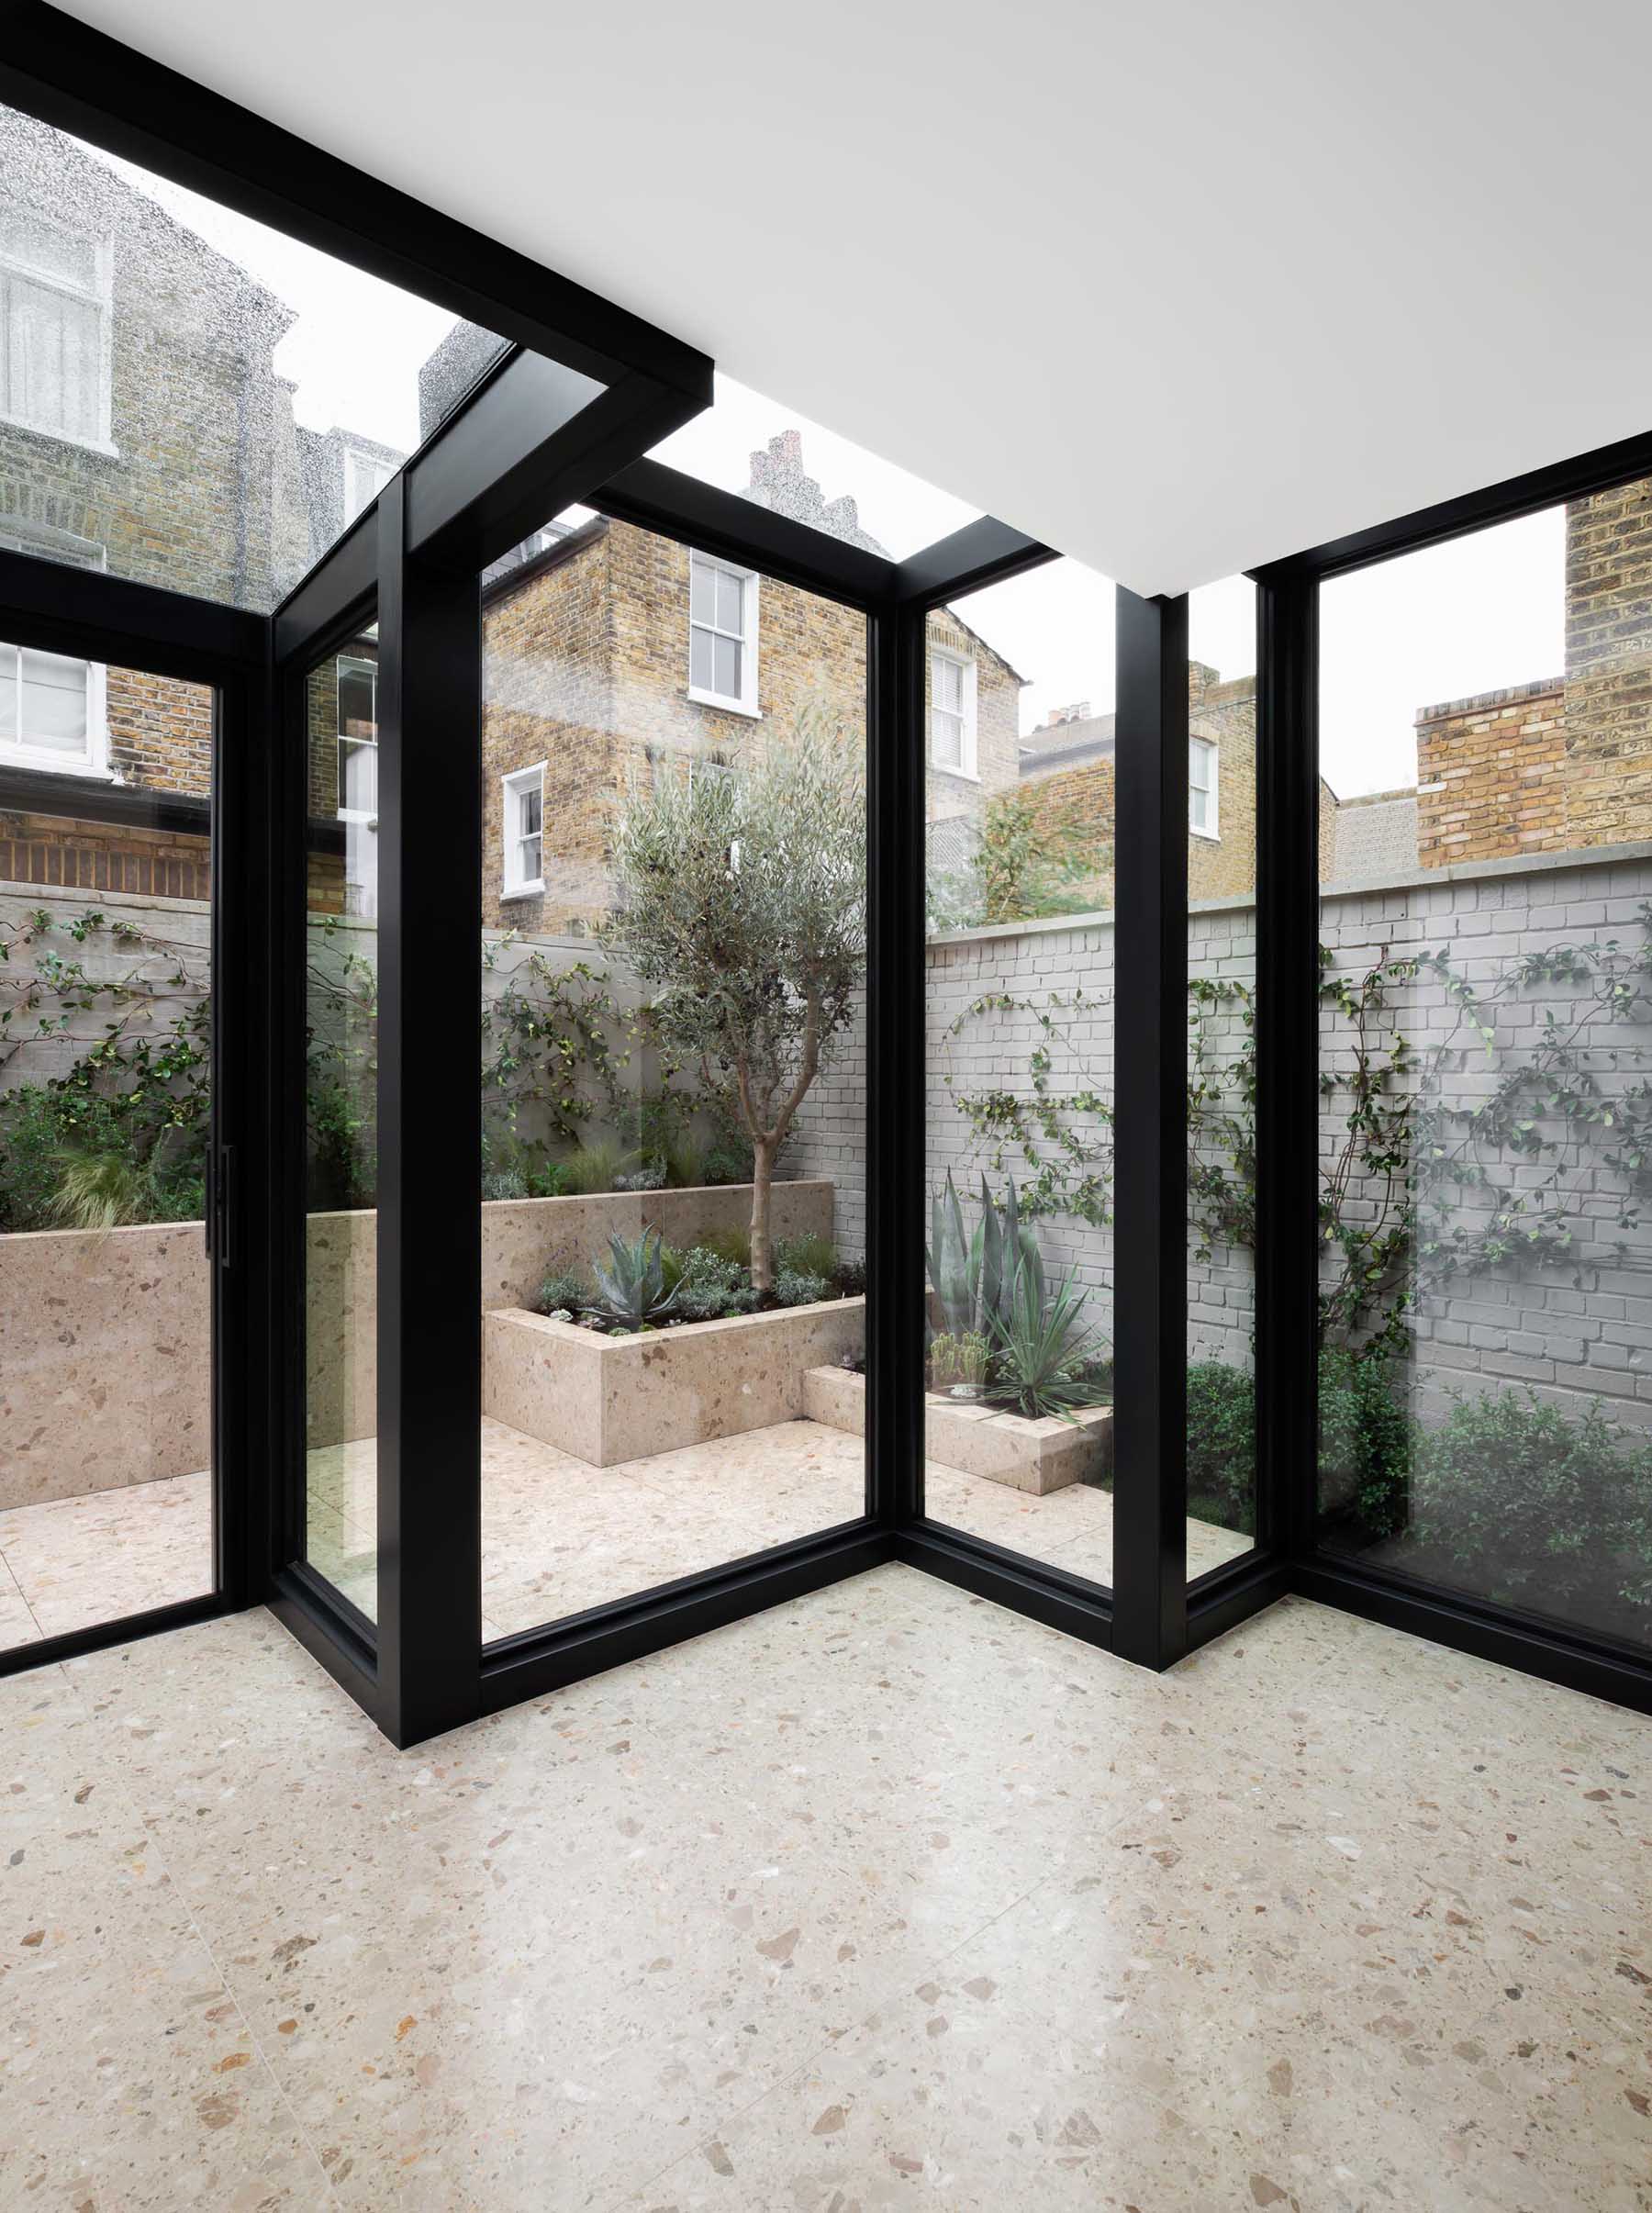 A modern house extension with thick black steel window frames.